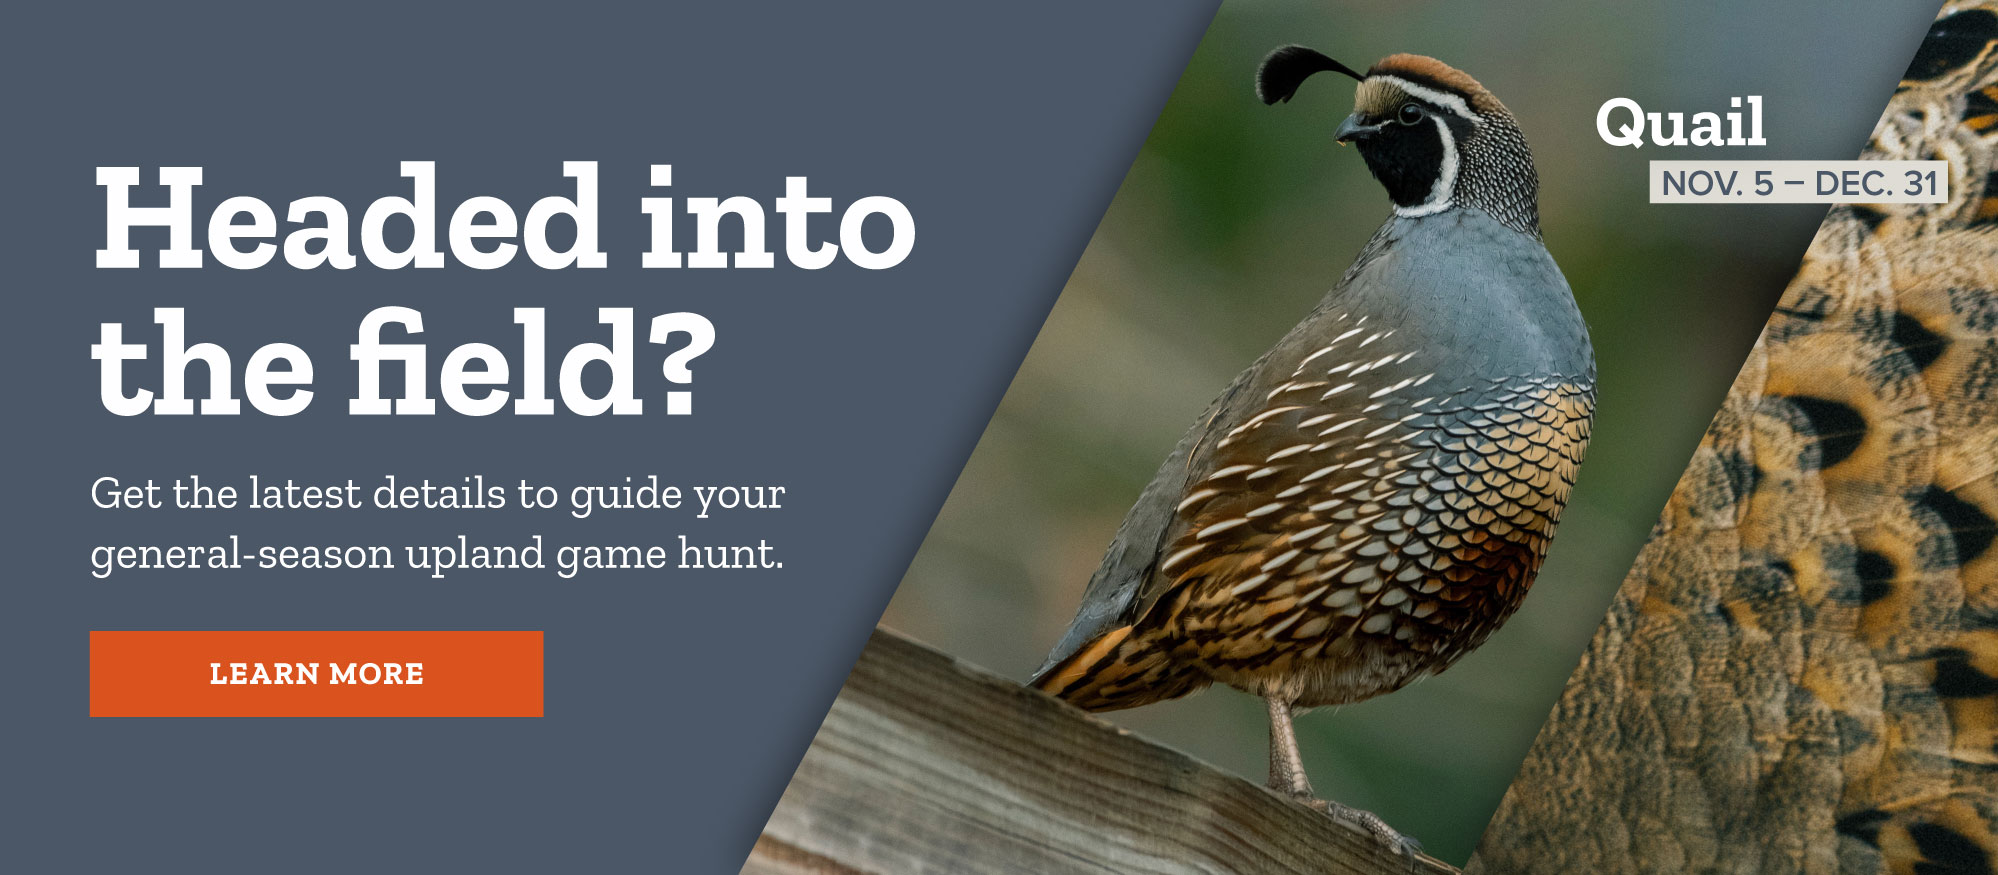 2022 quail hunts: Get the latest details to guide your upland game hunt.